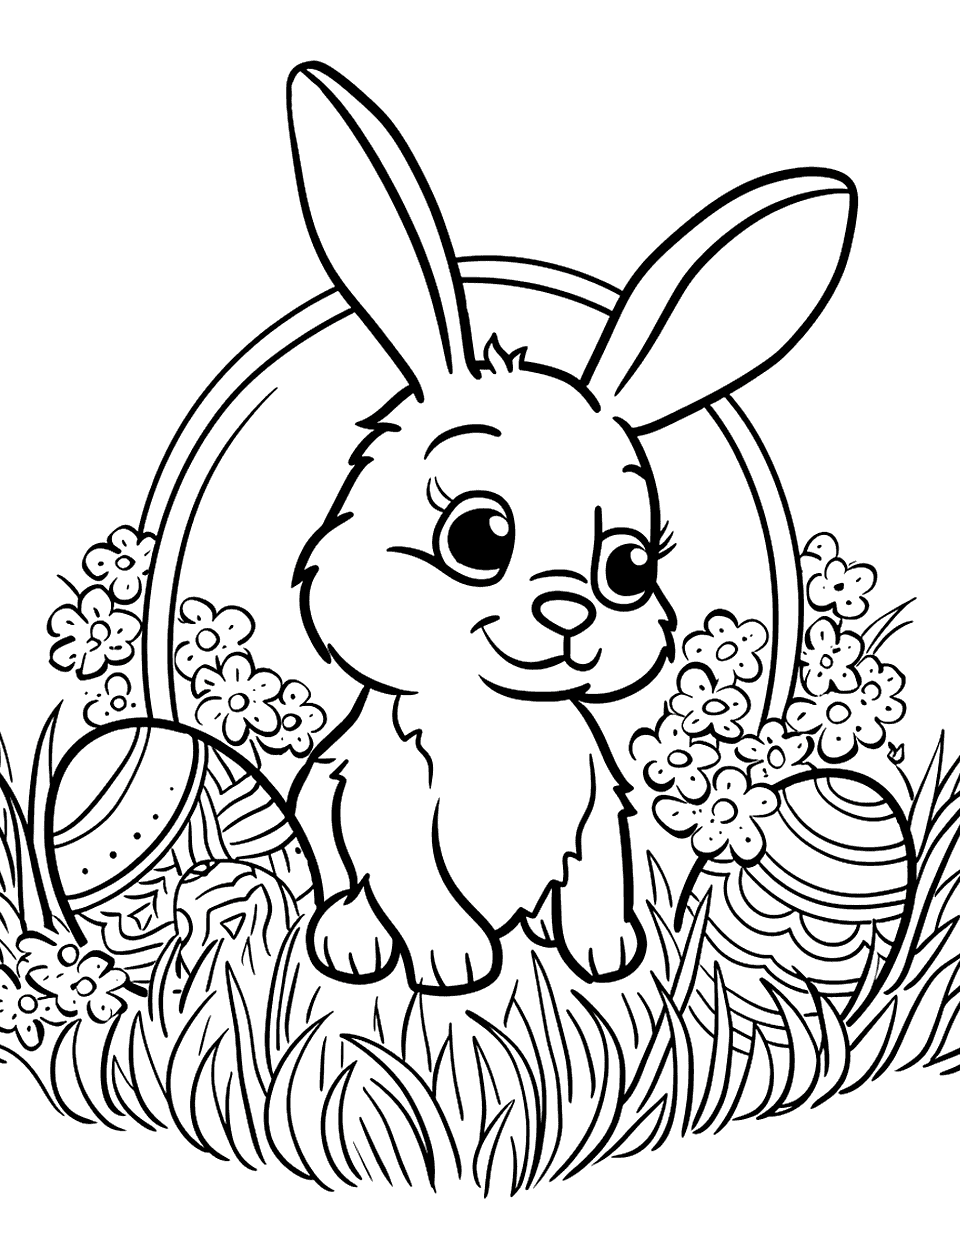 Bunny in the Garden Easter Coloring Page - A single bunny sits in a garden, surrounded by colorful flowers and Easter eggs.